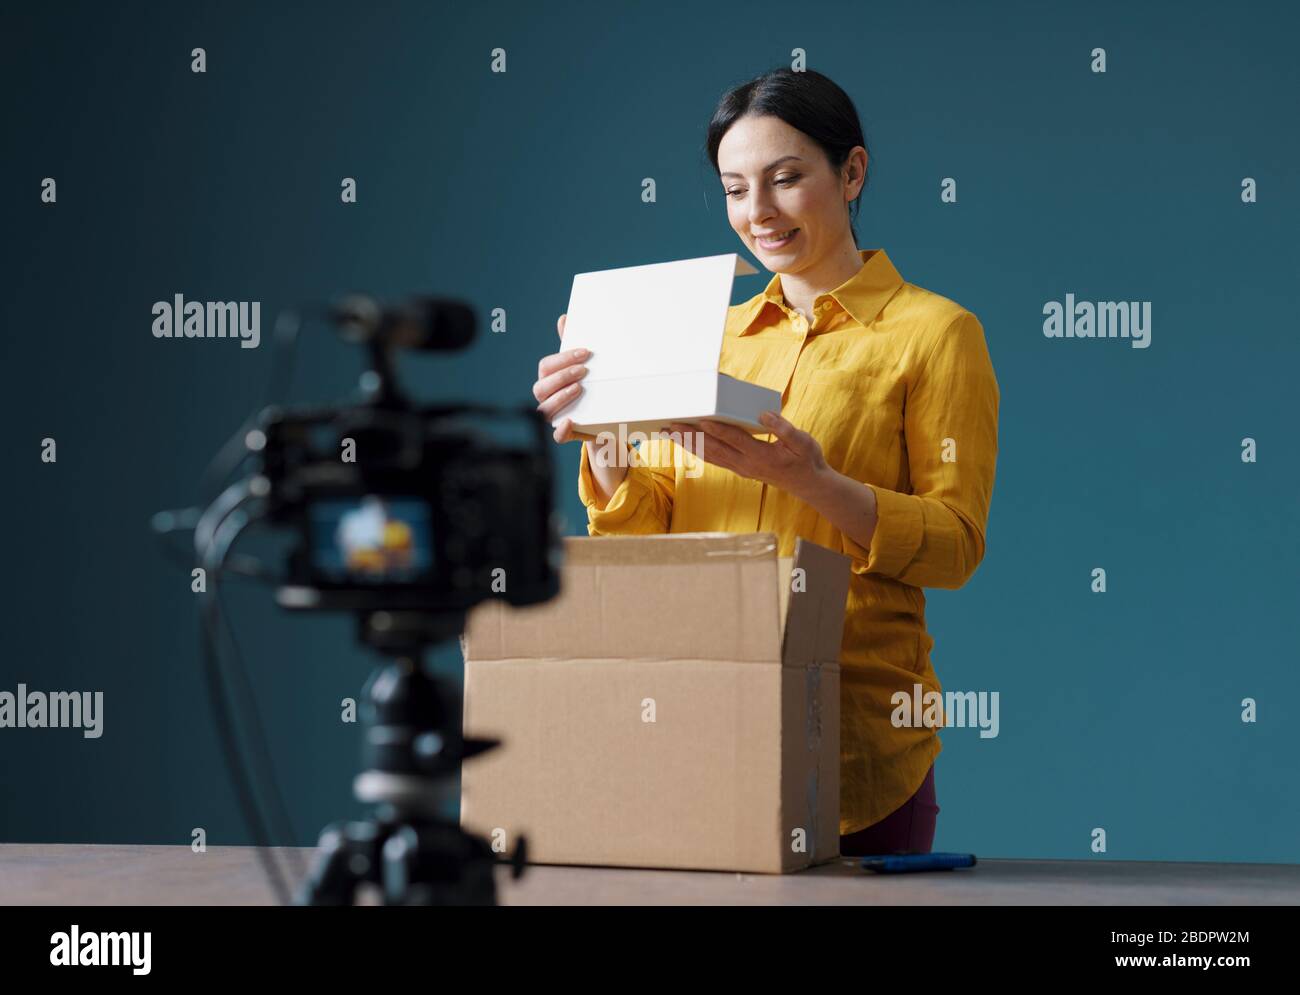 Vlogger making a unboxing video for her channel, she is opening a delivery box Stock Photo